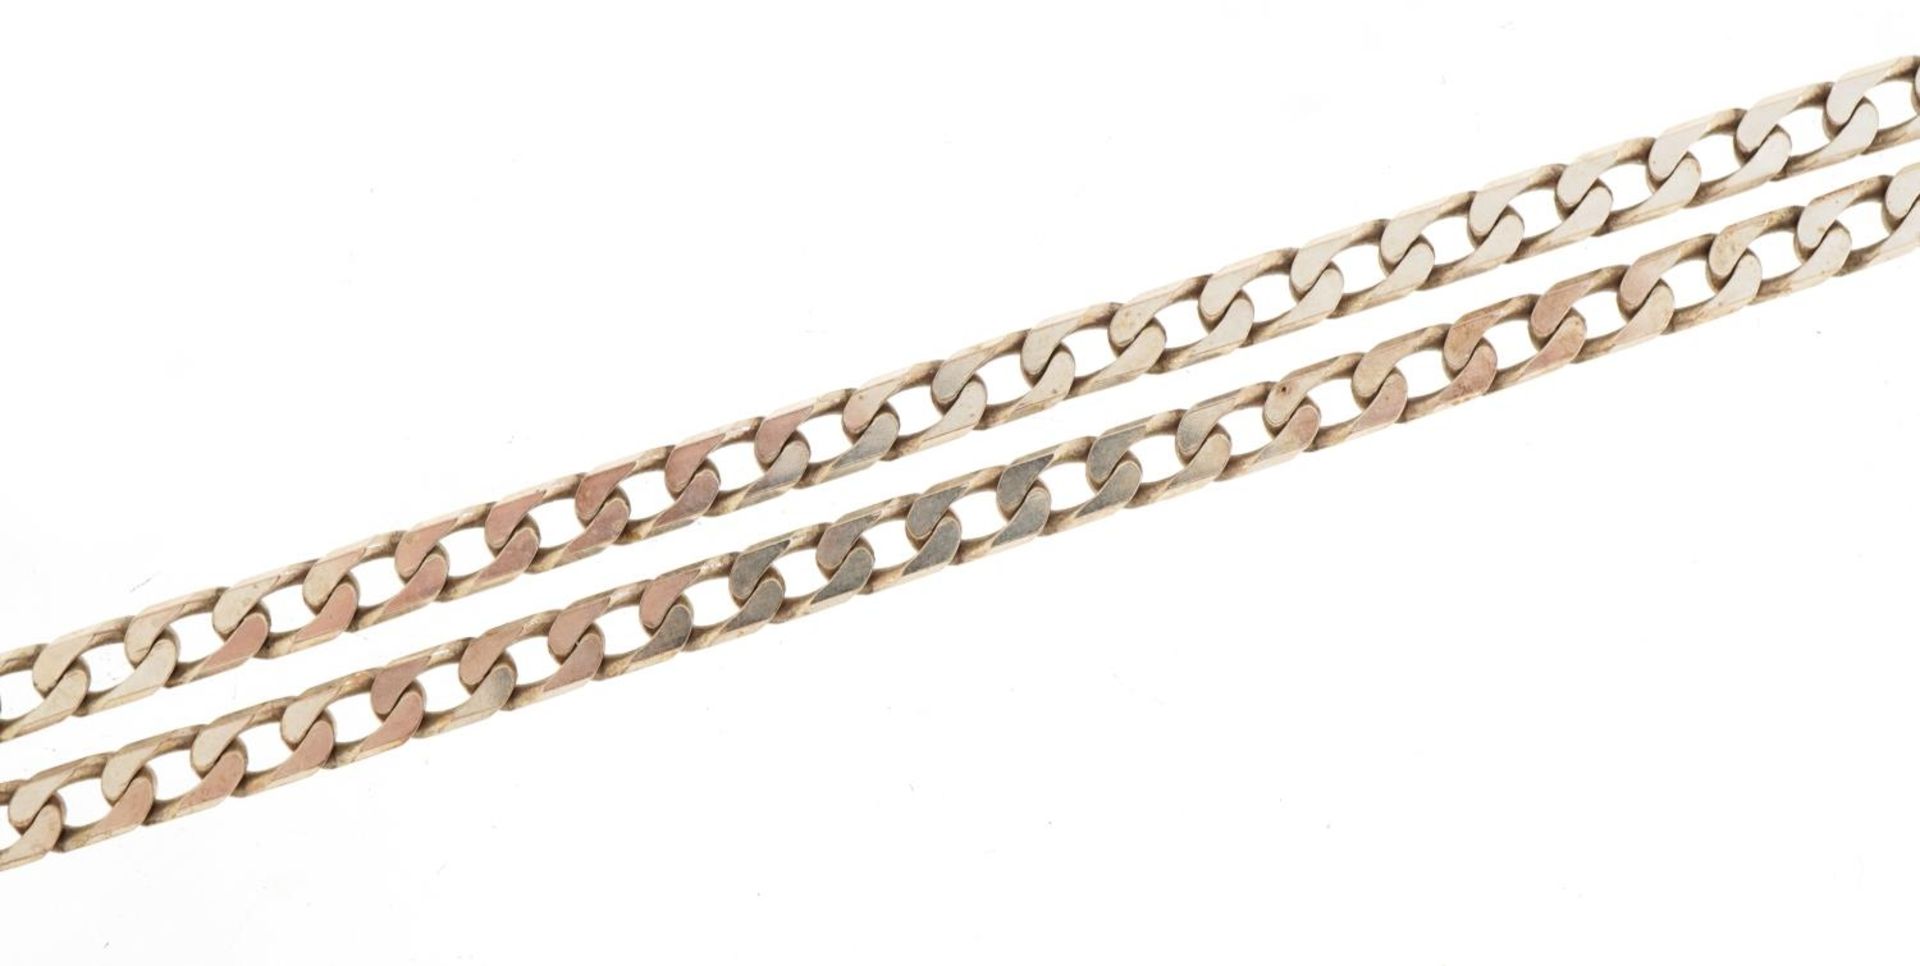 925 silver curb link necklace, 48cm in length, 20.1g